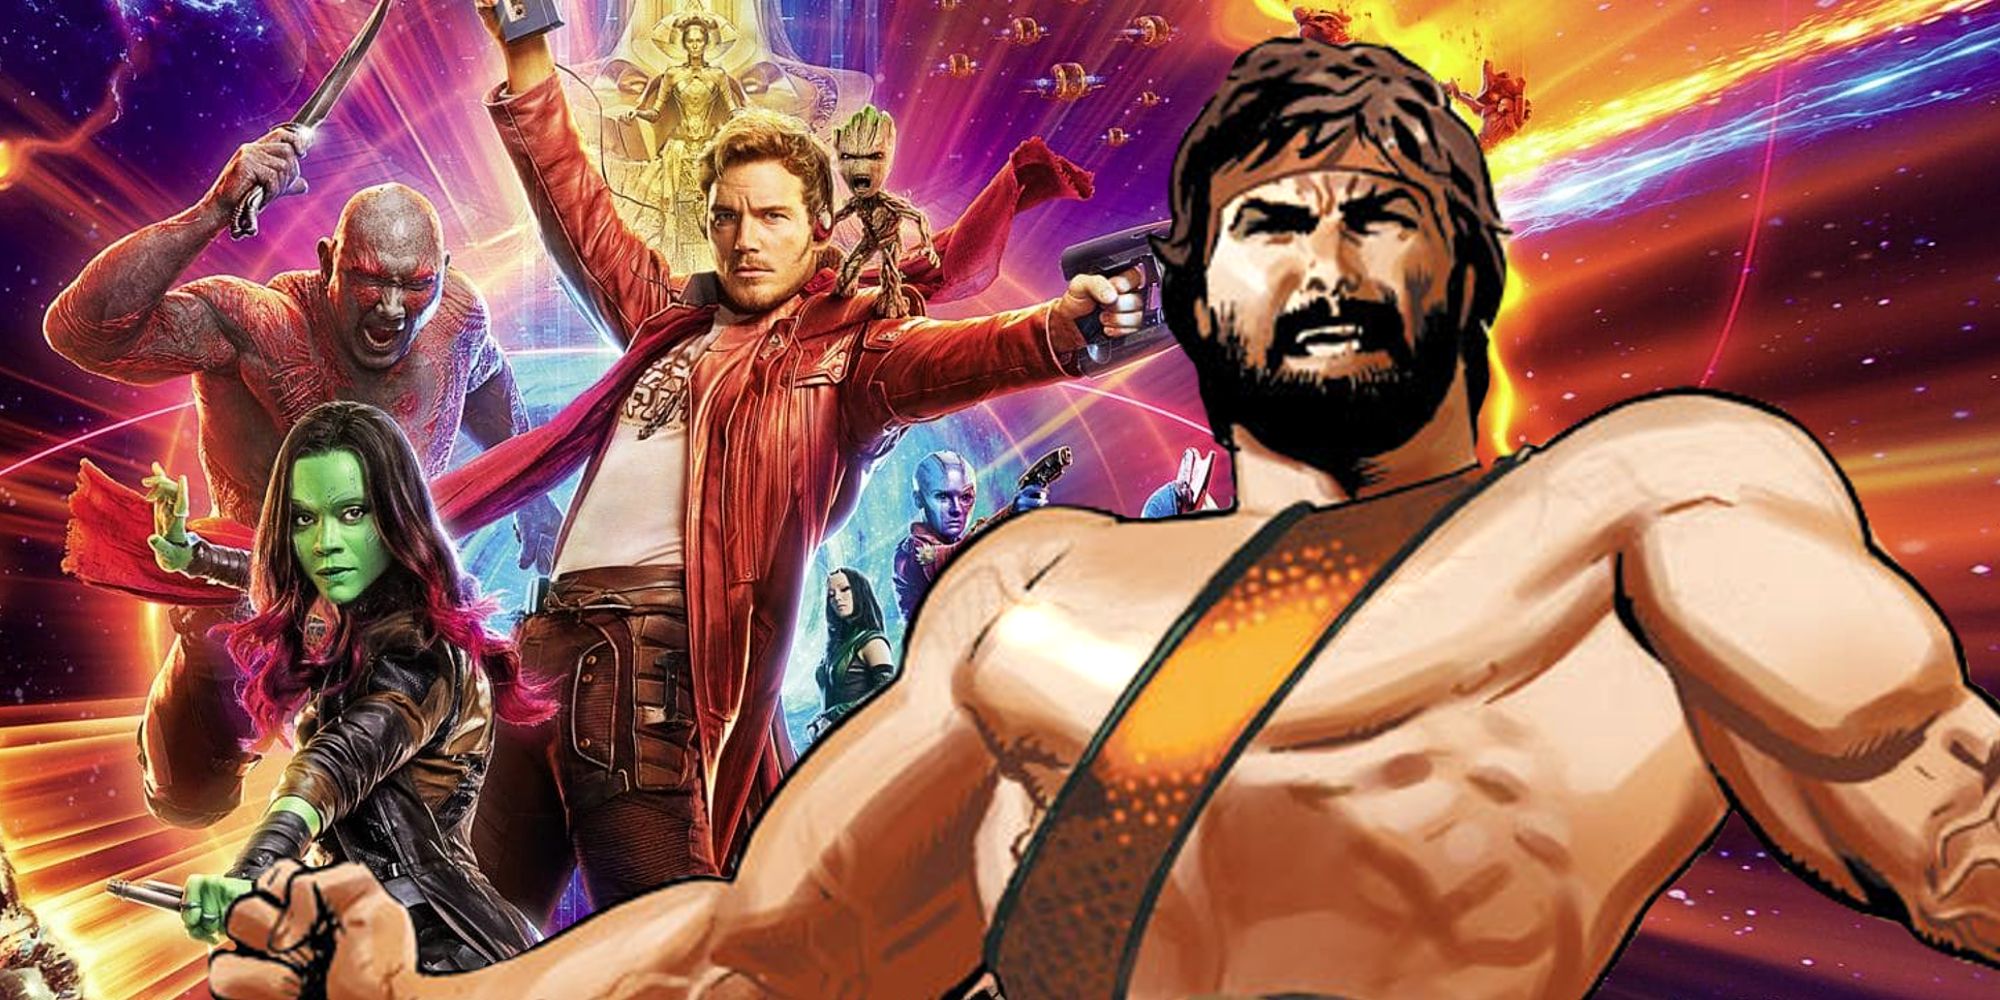 Marvel's Hercules and the Guardians of the Galaxy